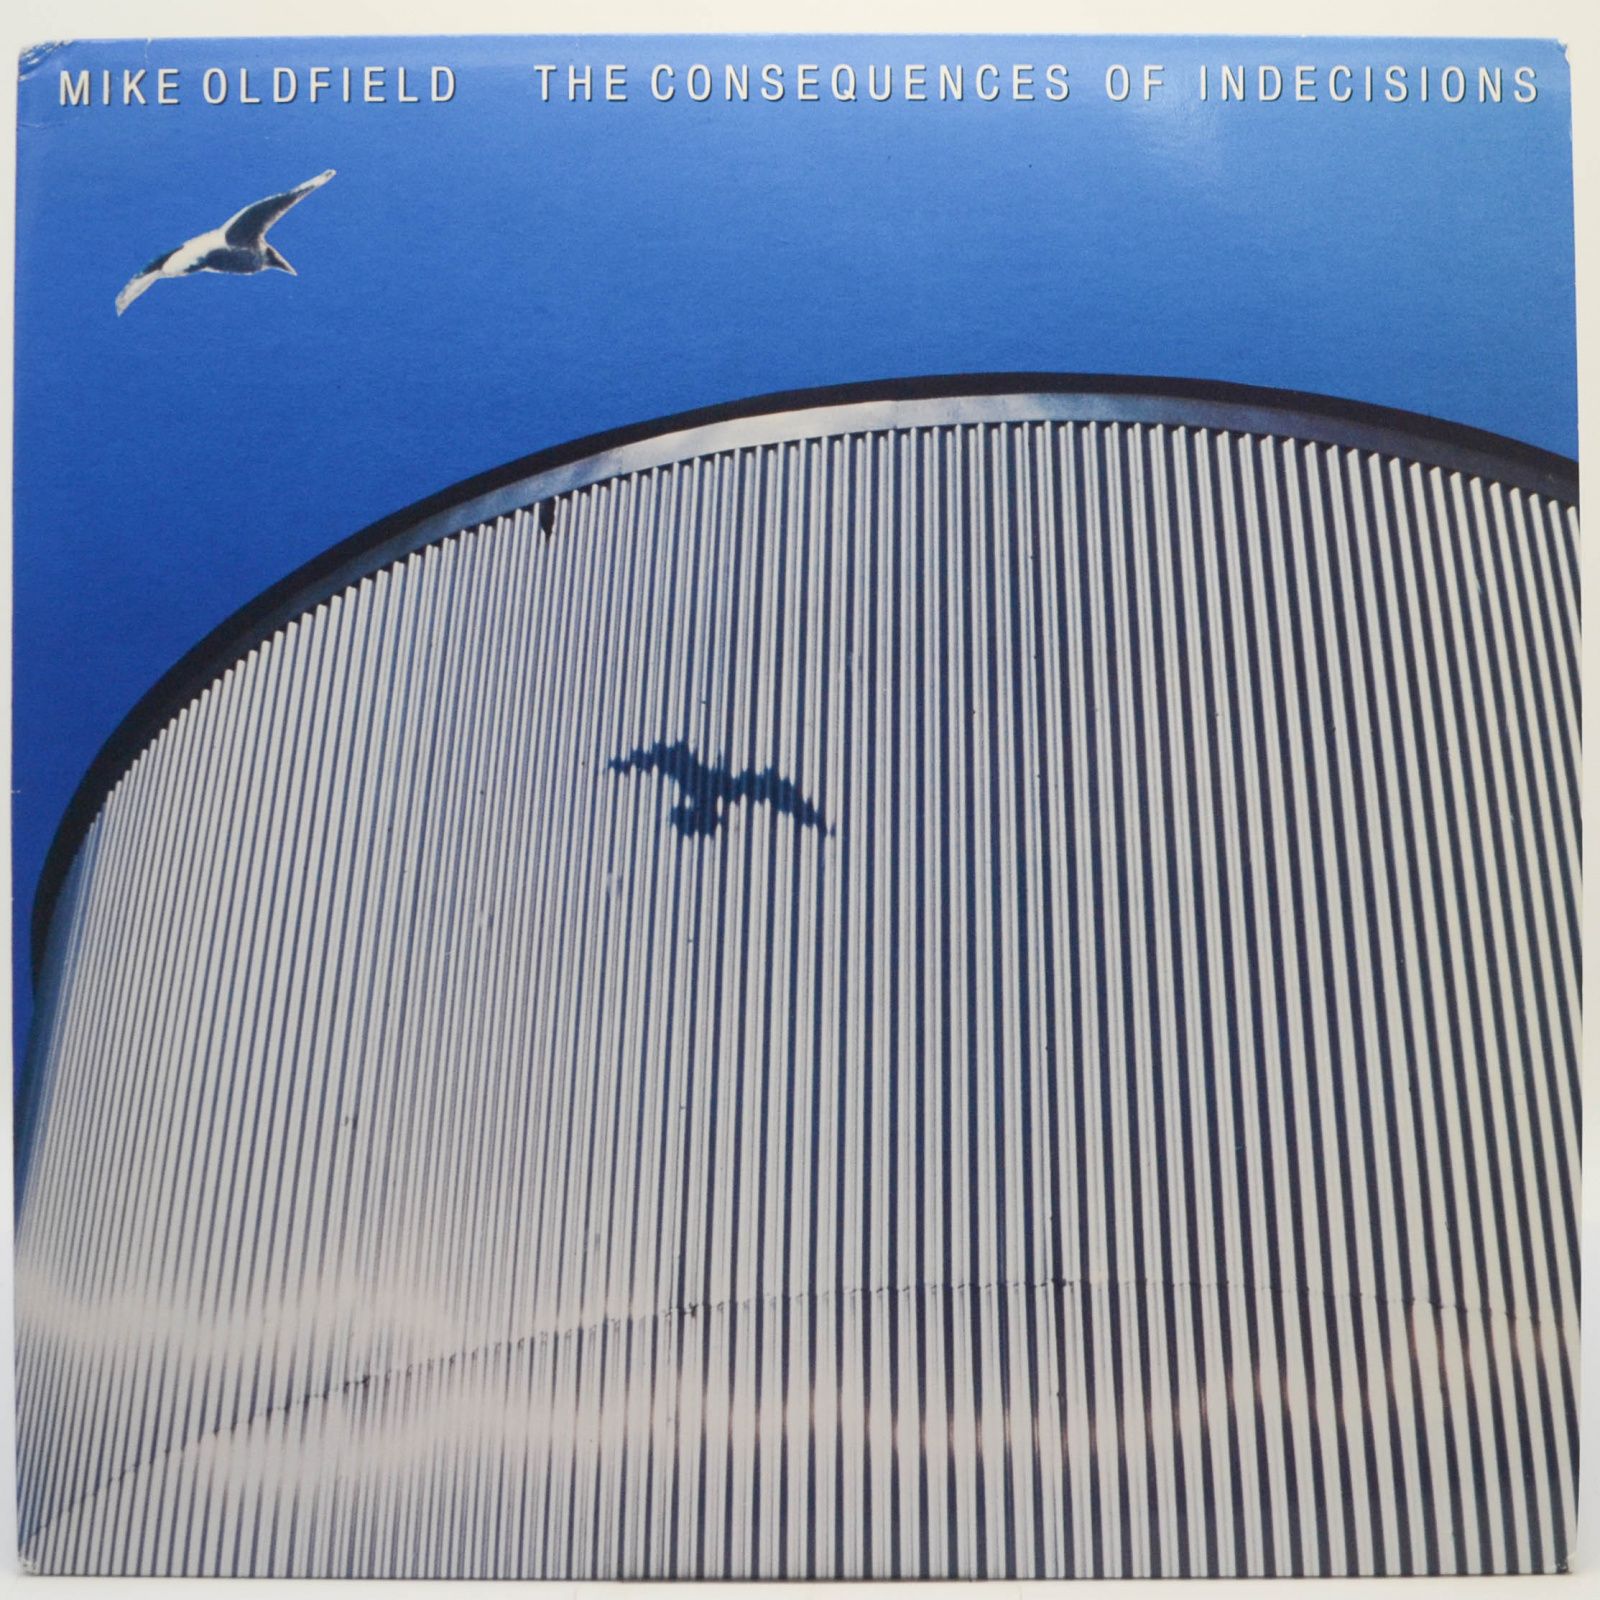 Mike Oldfield — The Consequences Of Indecisions, 1981